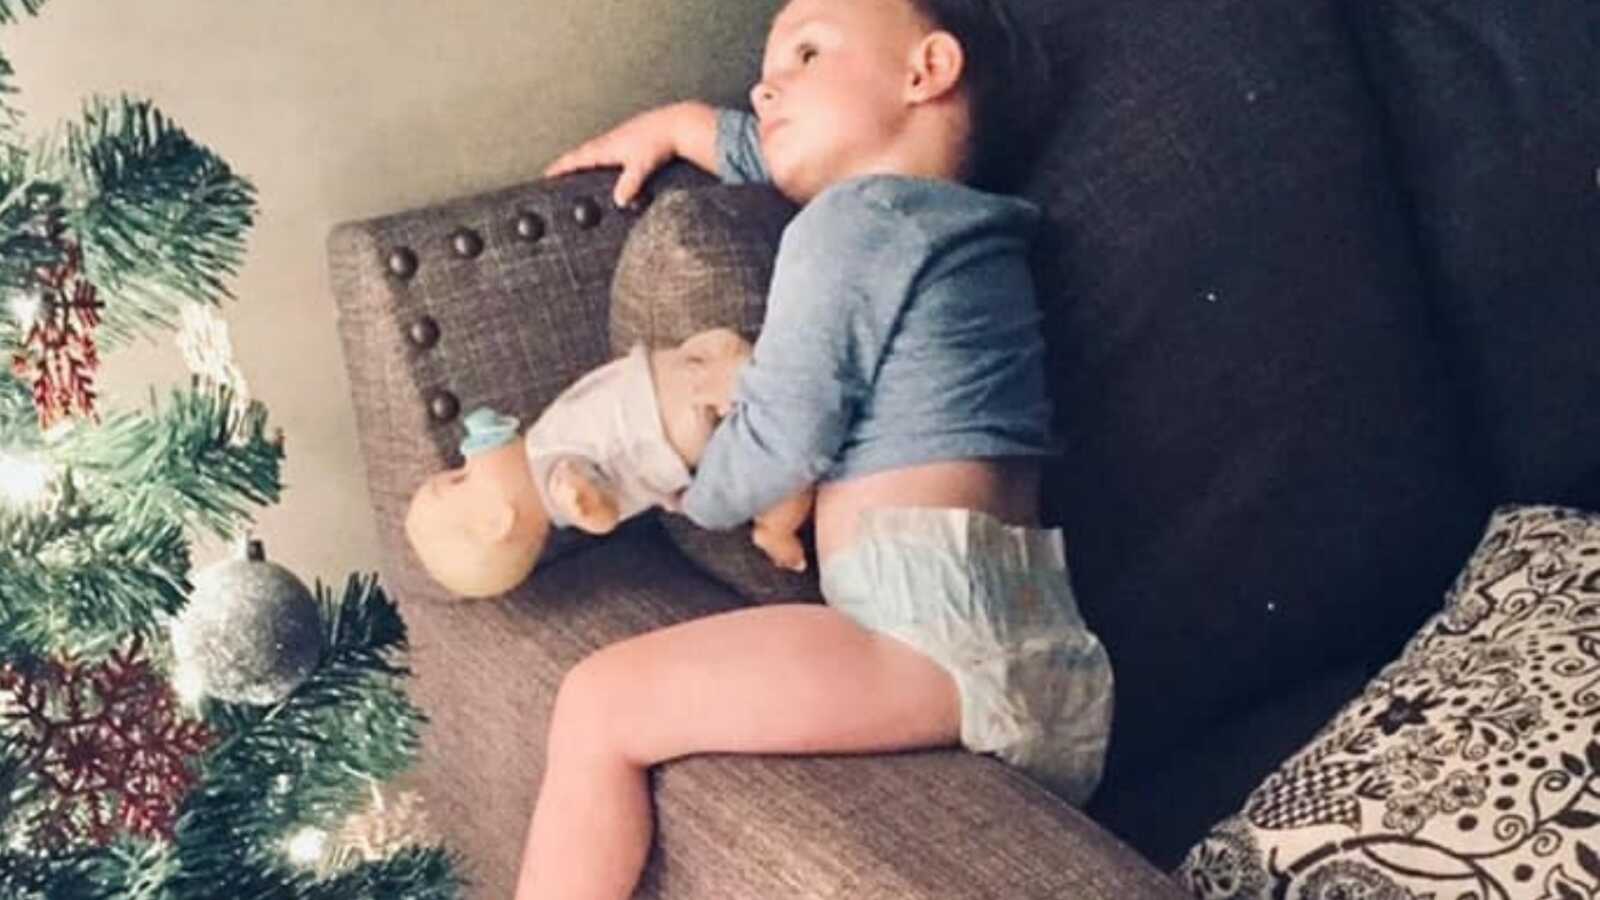 Little boy sitting on arm of couch admiring the lit up Christmas tree